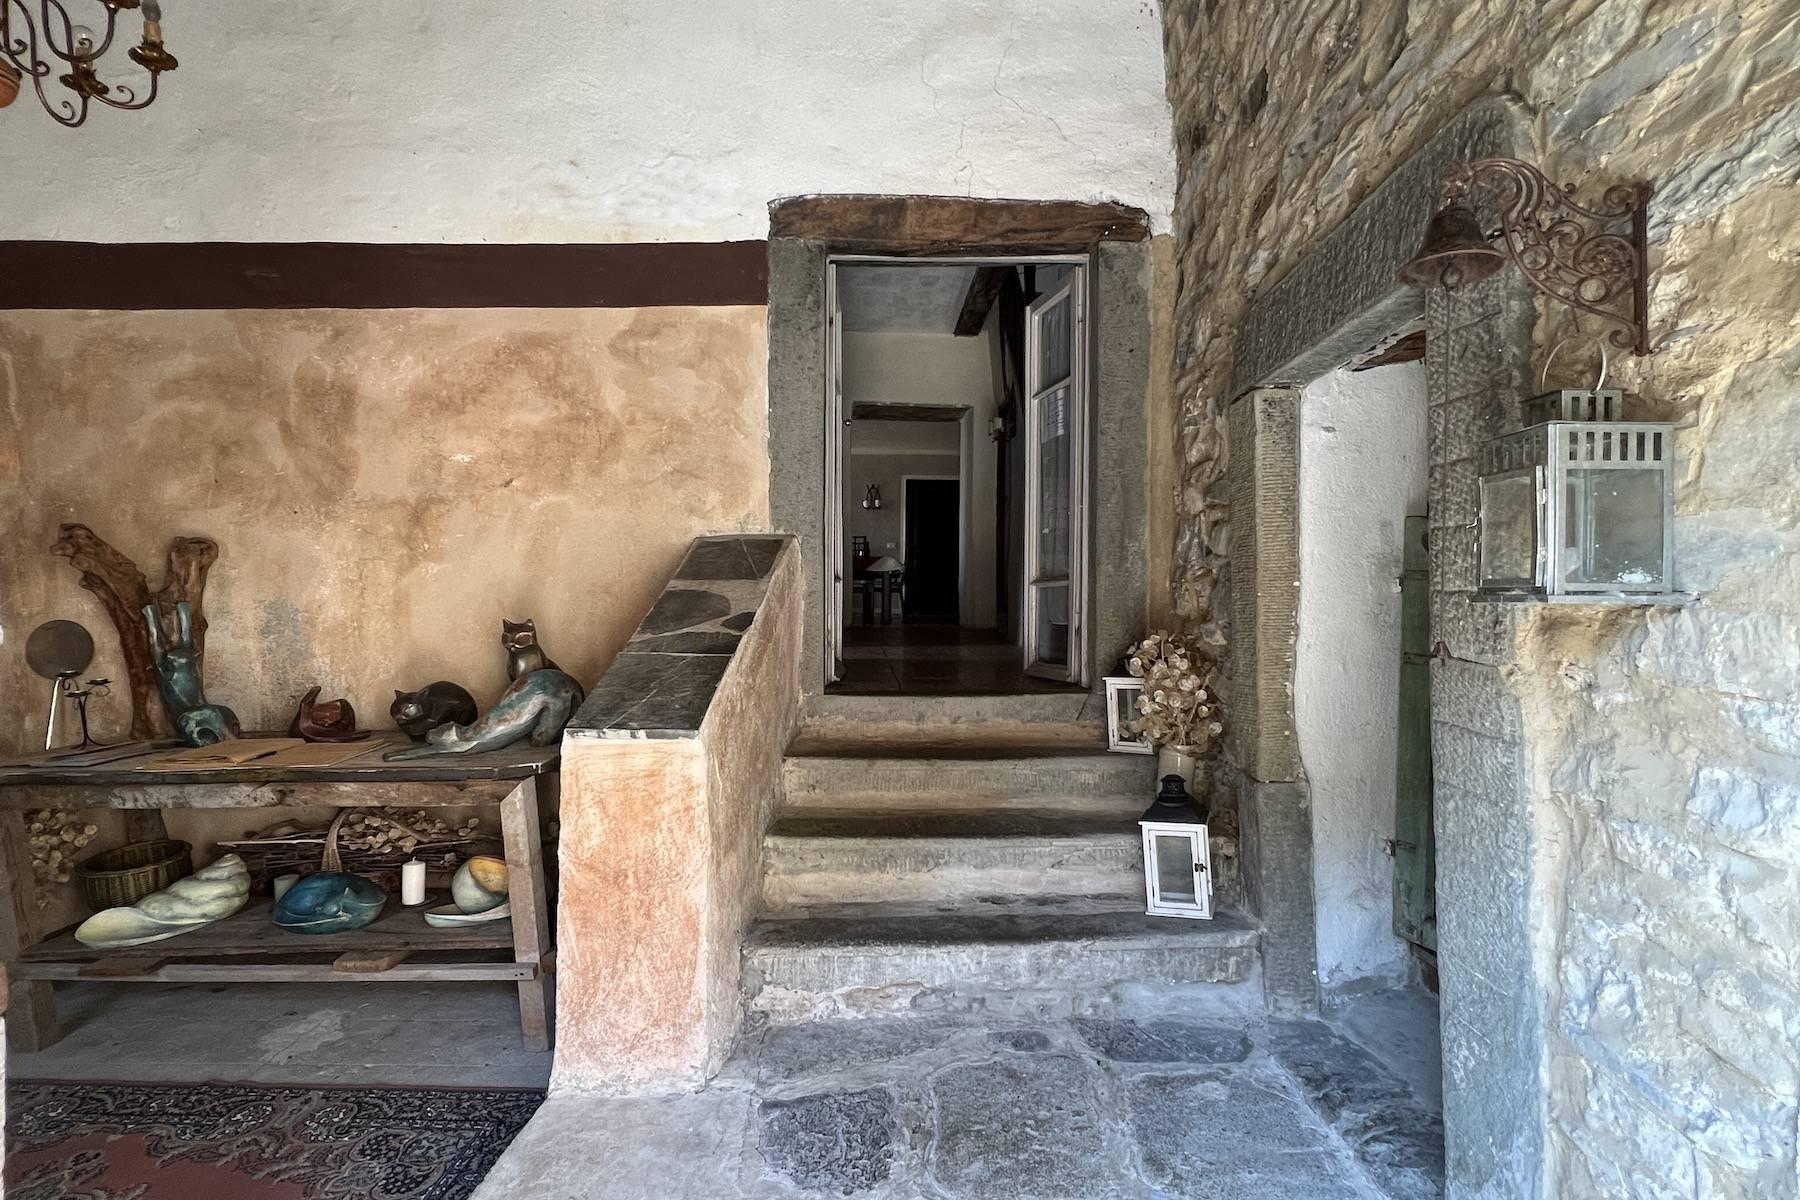 Small ancient hamlet on the Lunigiana hills - 1